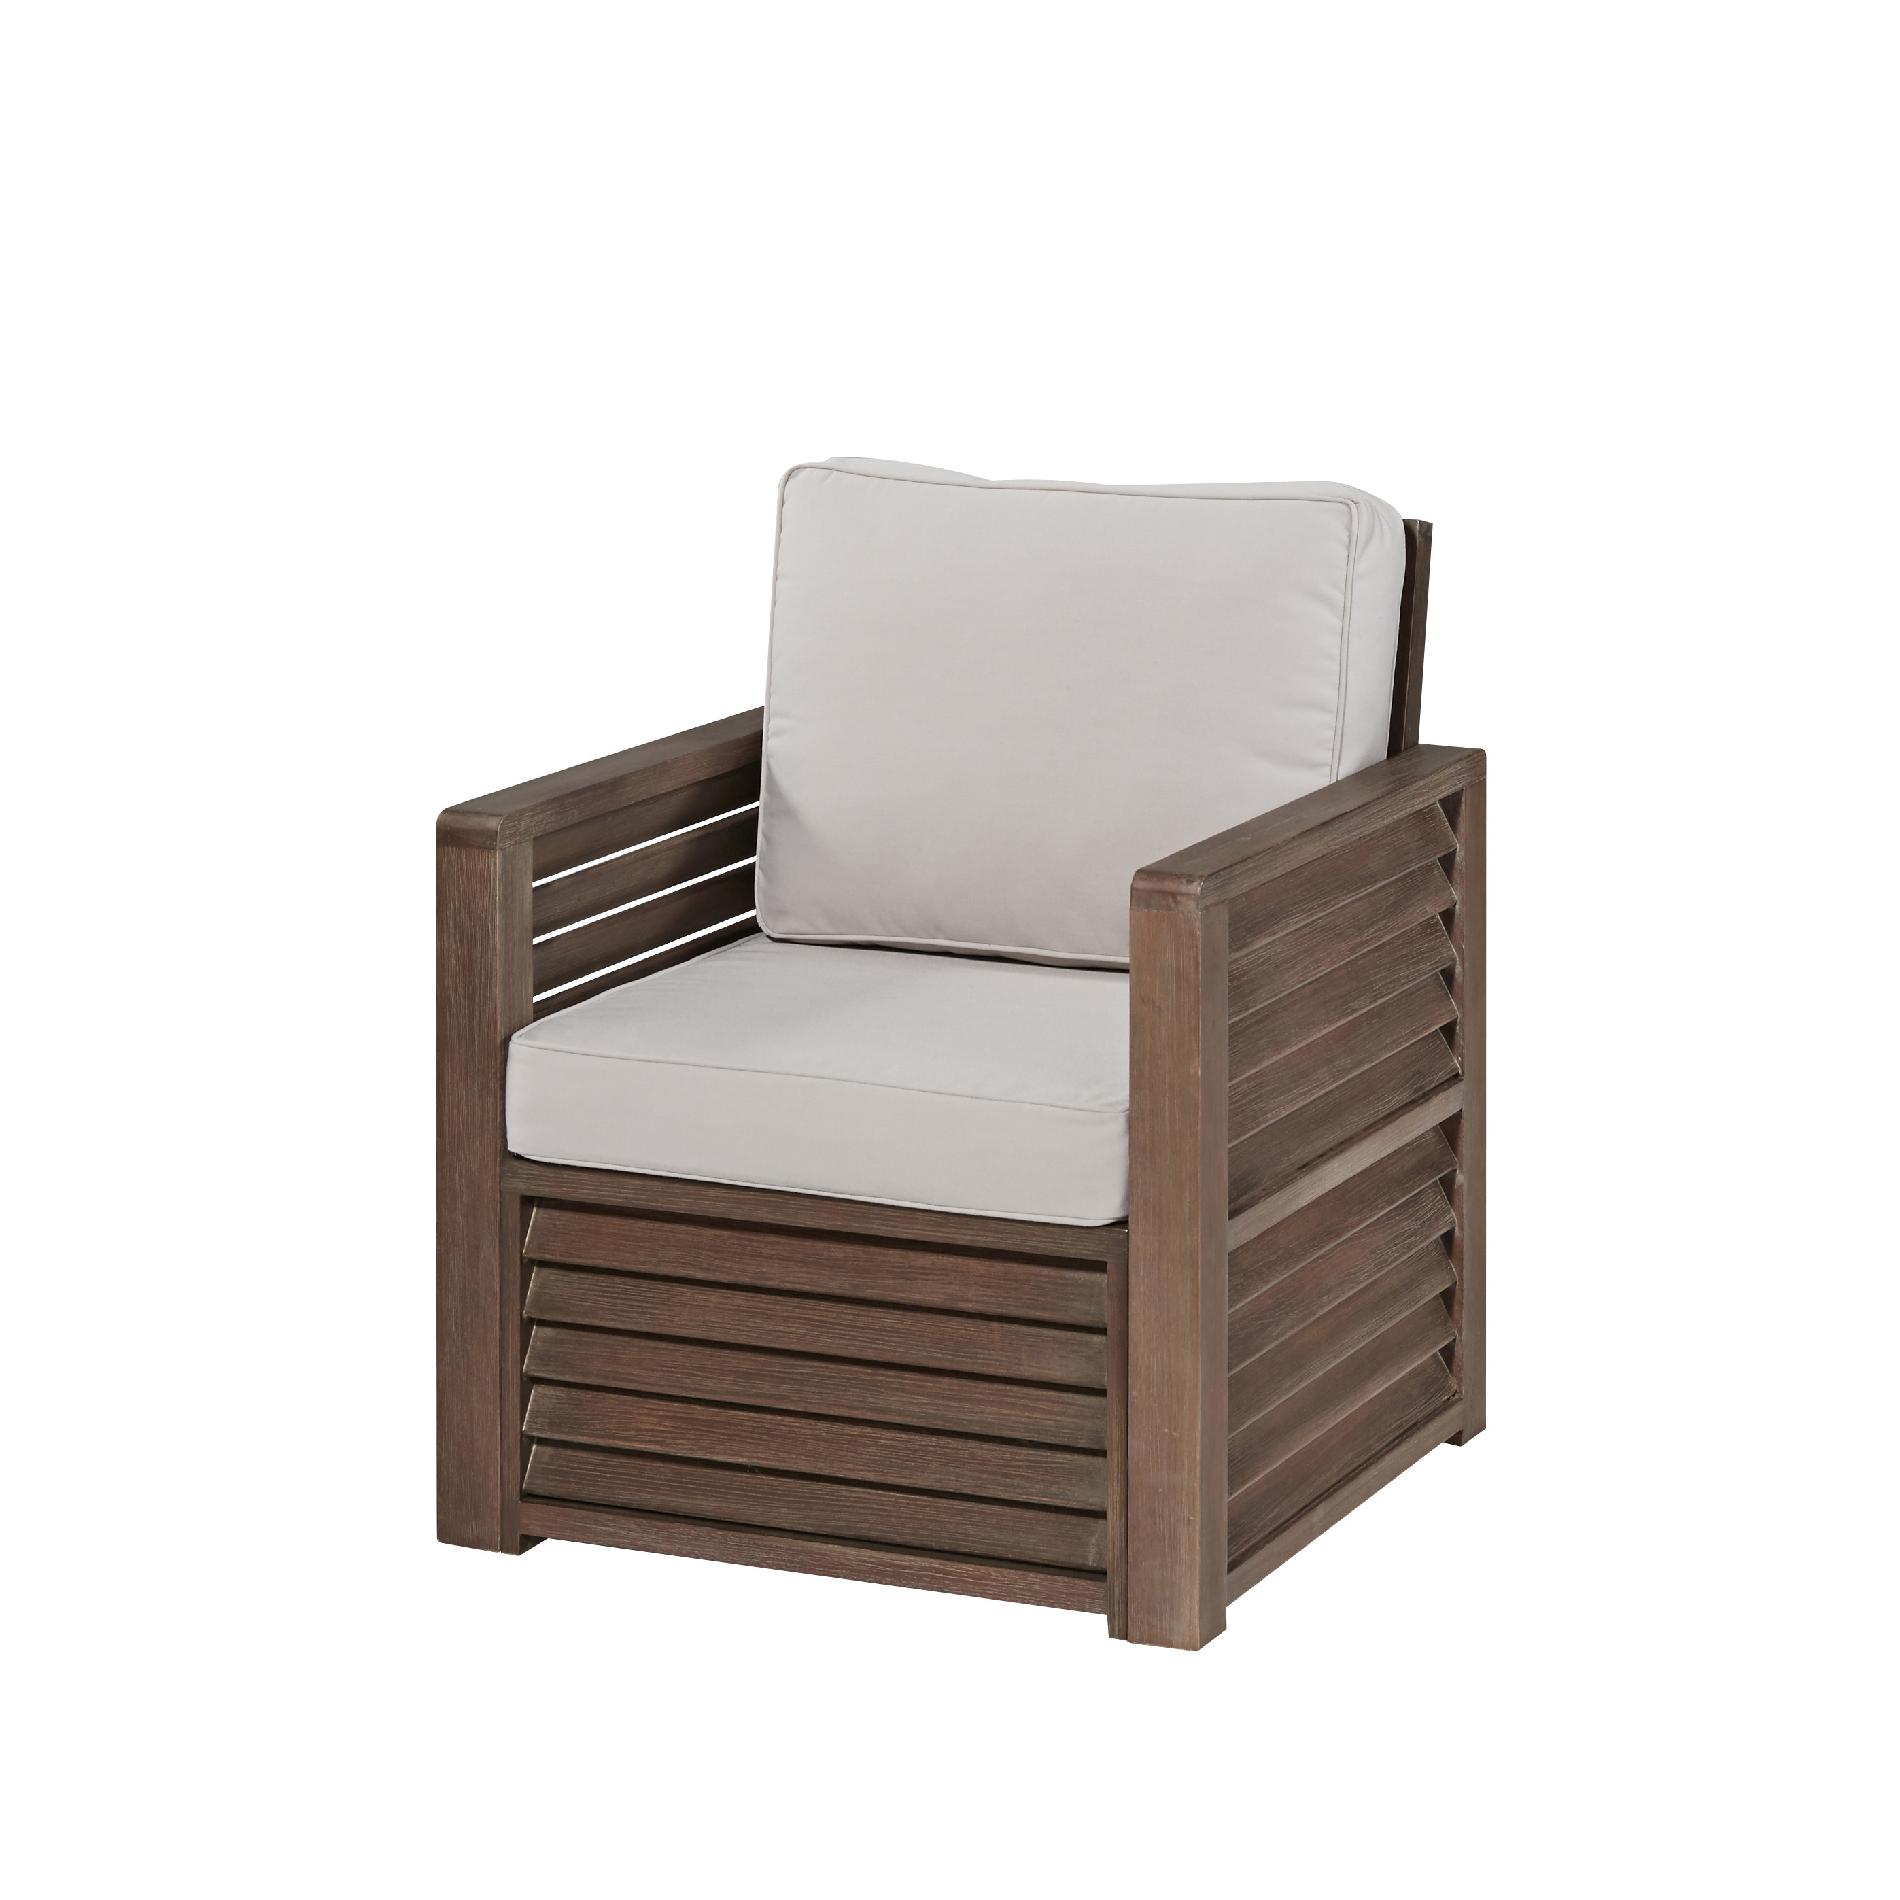 Home Styles Barnside Chair   Outdoor Living   Patio Furniture   Chairs